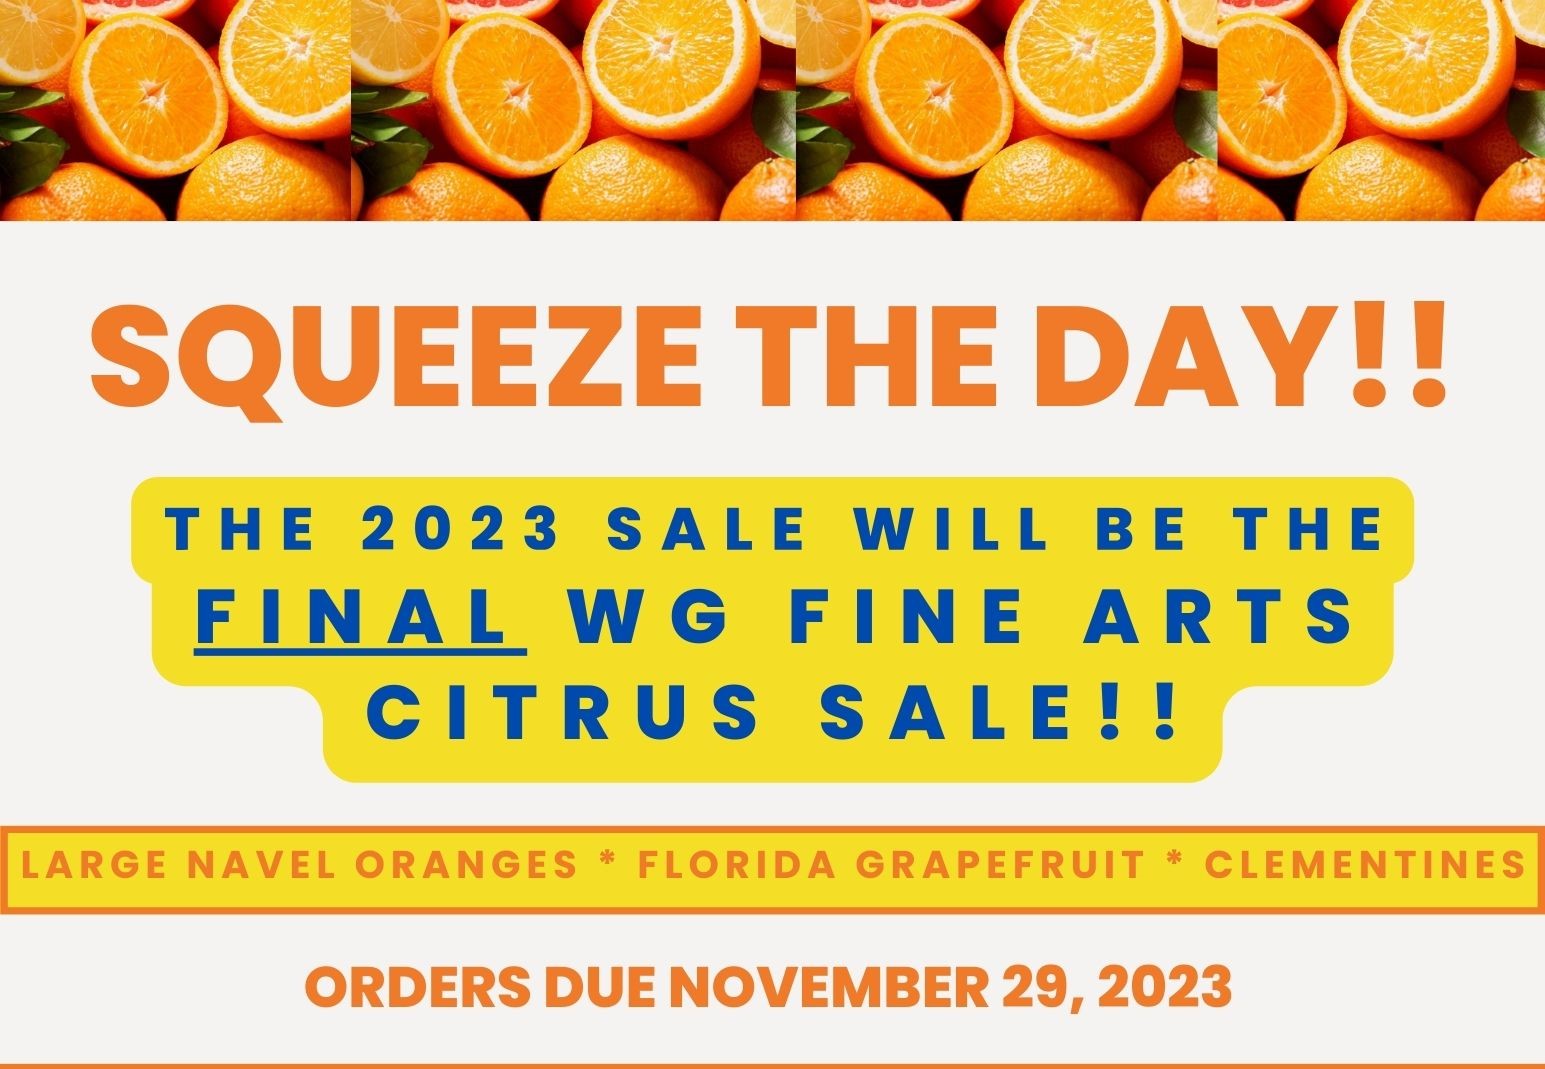 Seize the day! The 2023 sale will be the FINAL WG fine arts citrus sale! Orders due November 29, 2023.